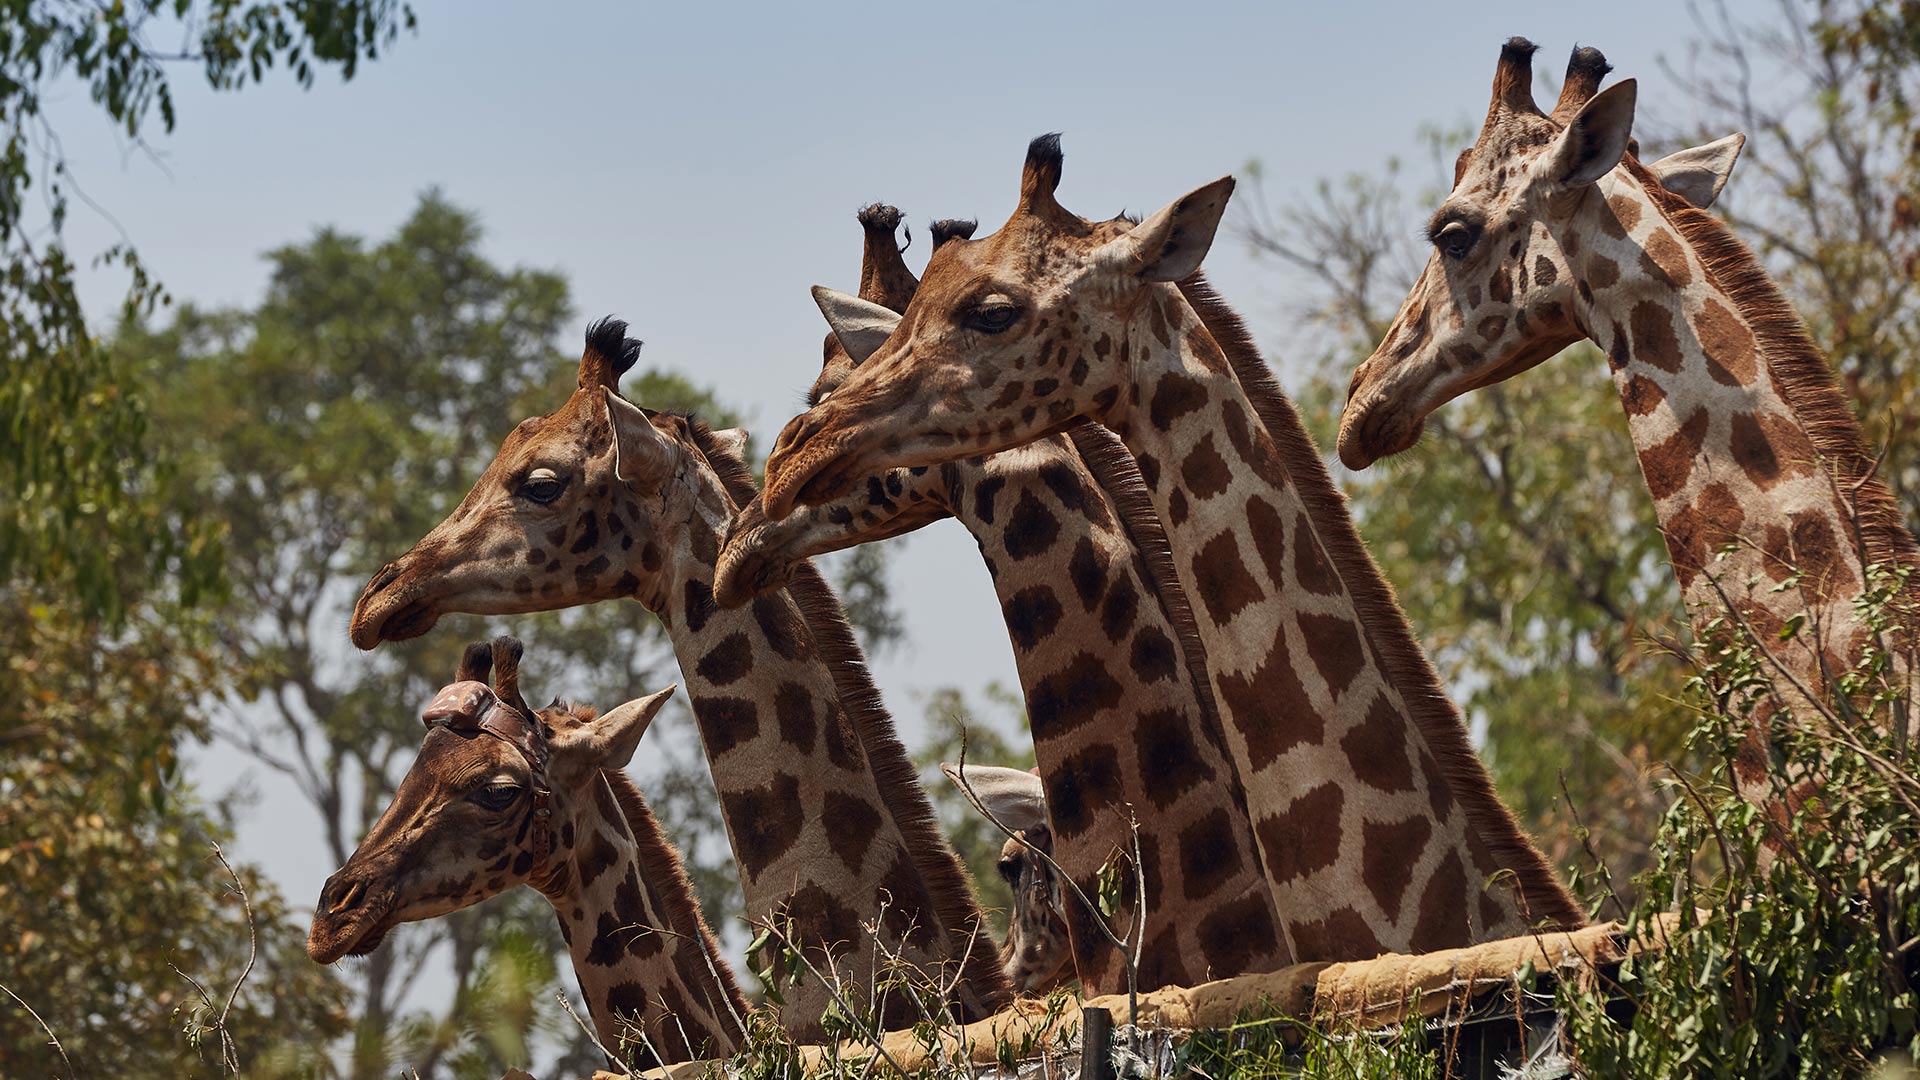 Six wild endangered Rothschild’s giraffes, one carrying a satellite transmitter, look out of the vehicle that has taken them to a new release site.